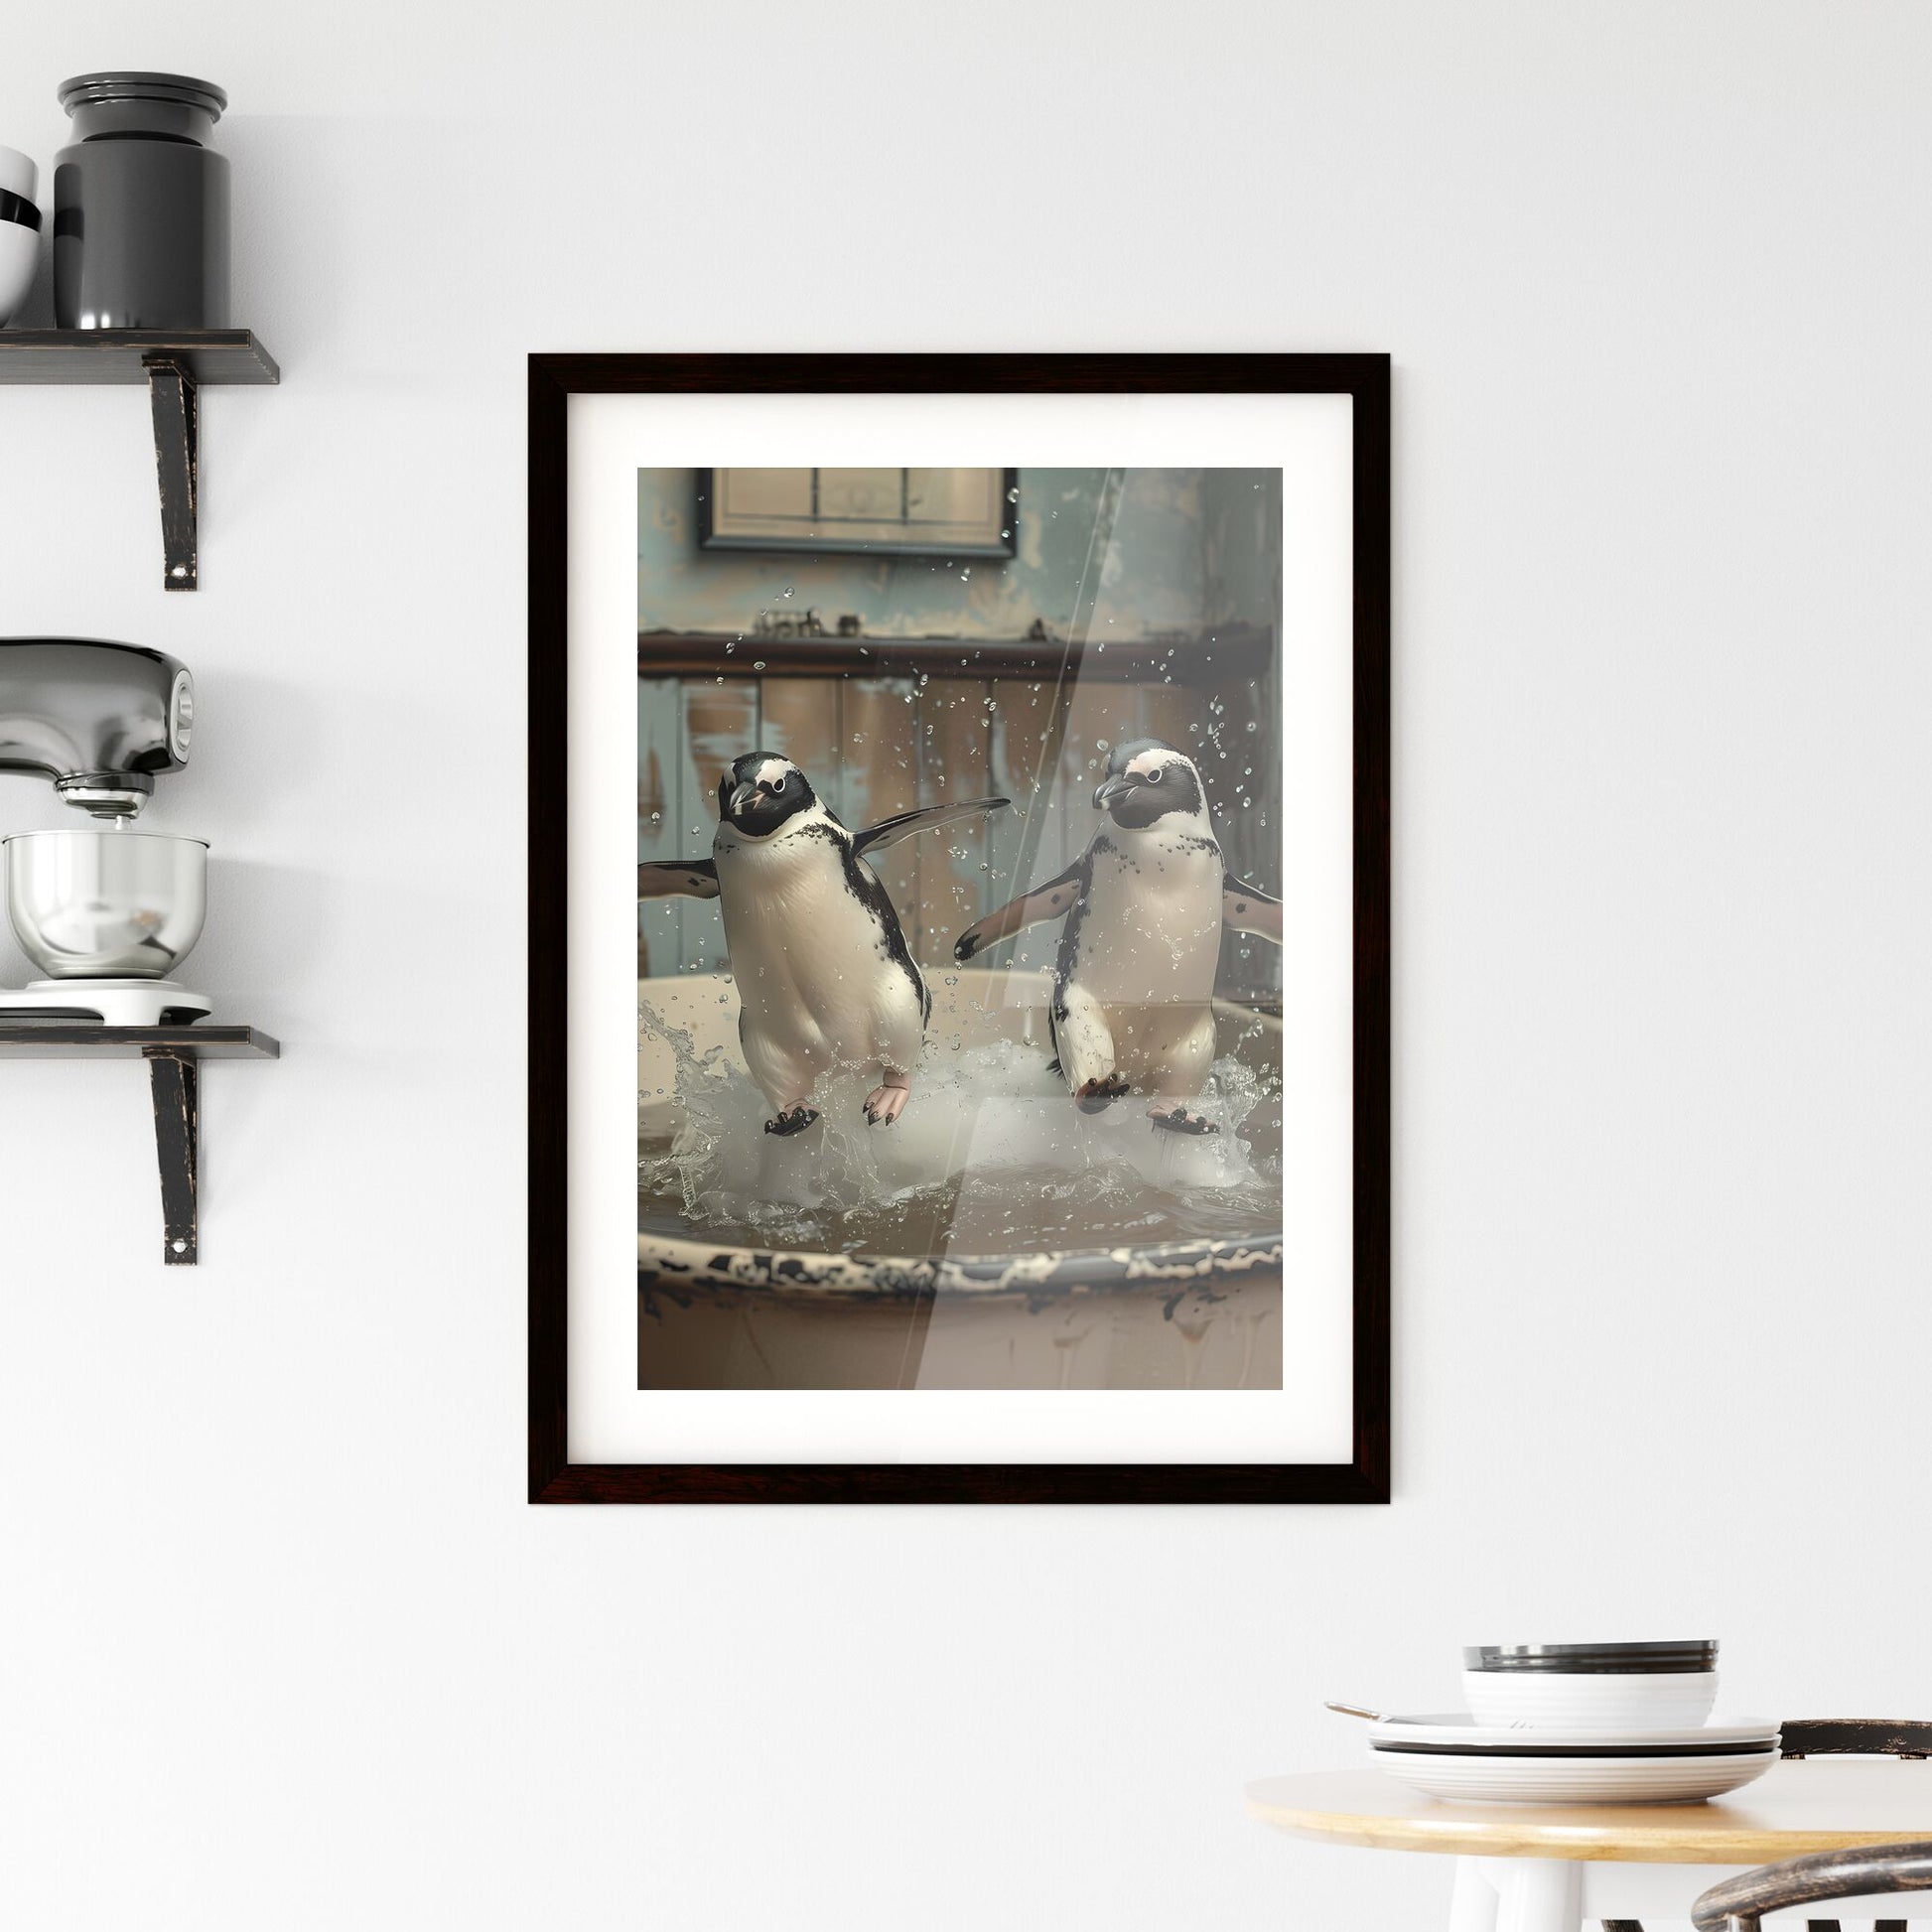 Wo penguins jump in a bathtub playing with each other, a storybook illustration, featured on cg society, art photography, whimsical, behance hd, storybook illustration black and white vintage - two penguins jumping into a tub of water Default Title